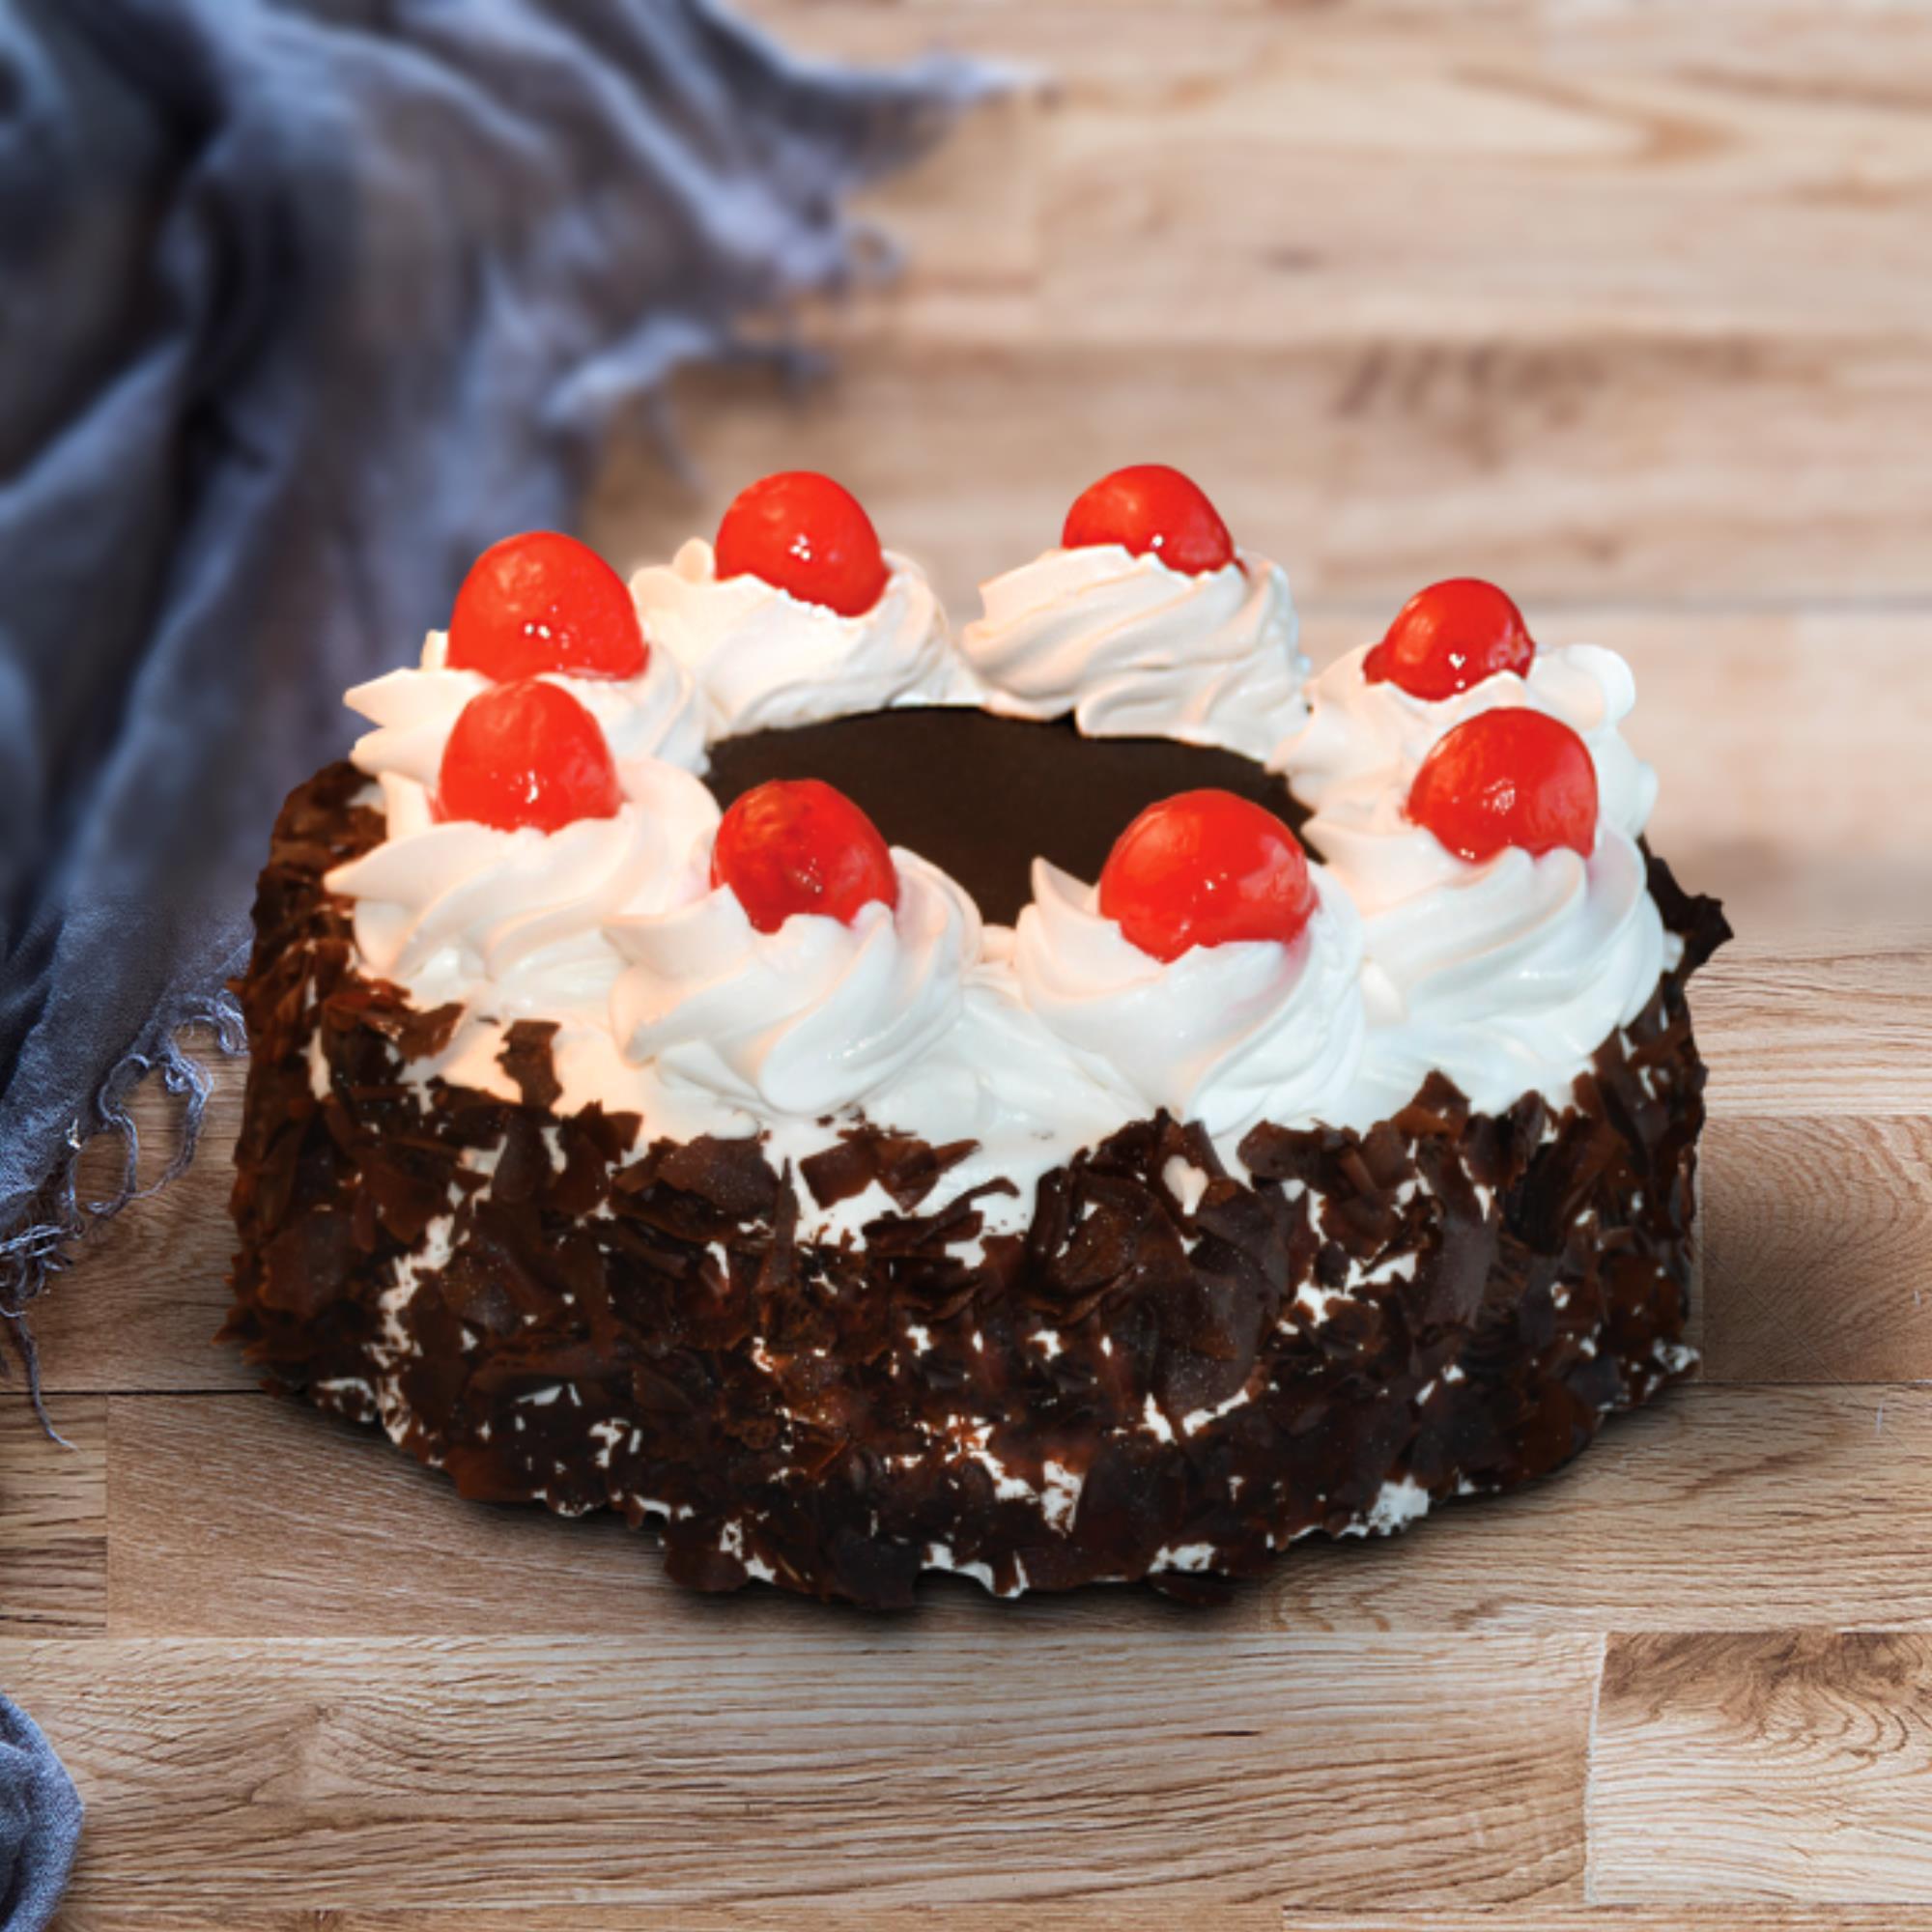 BLACK FOREST CAKE - Awfully Chocolate